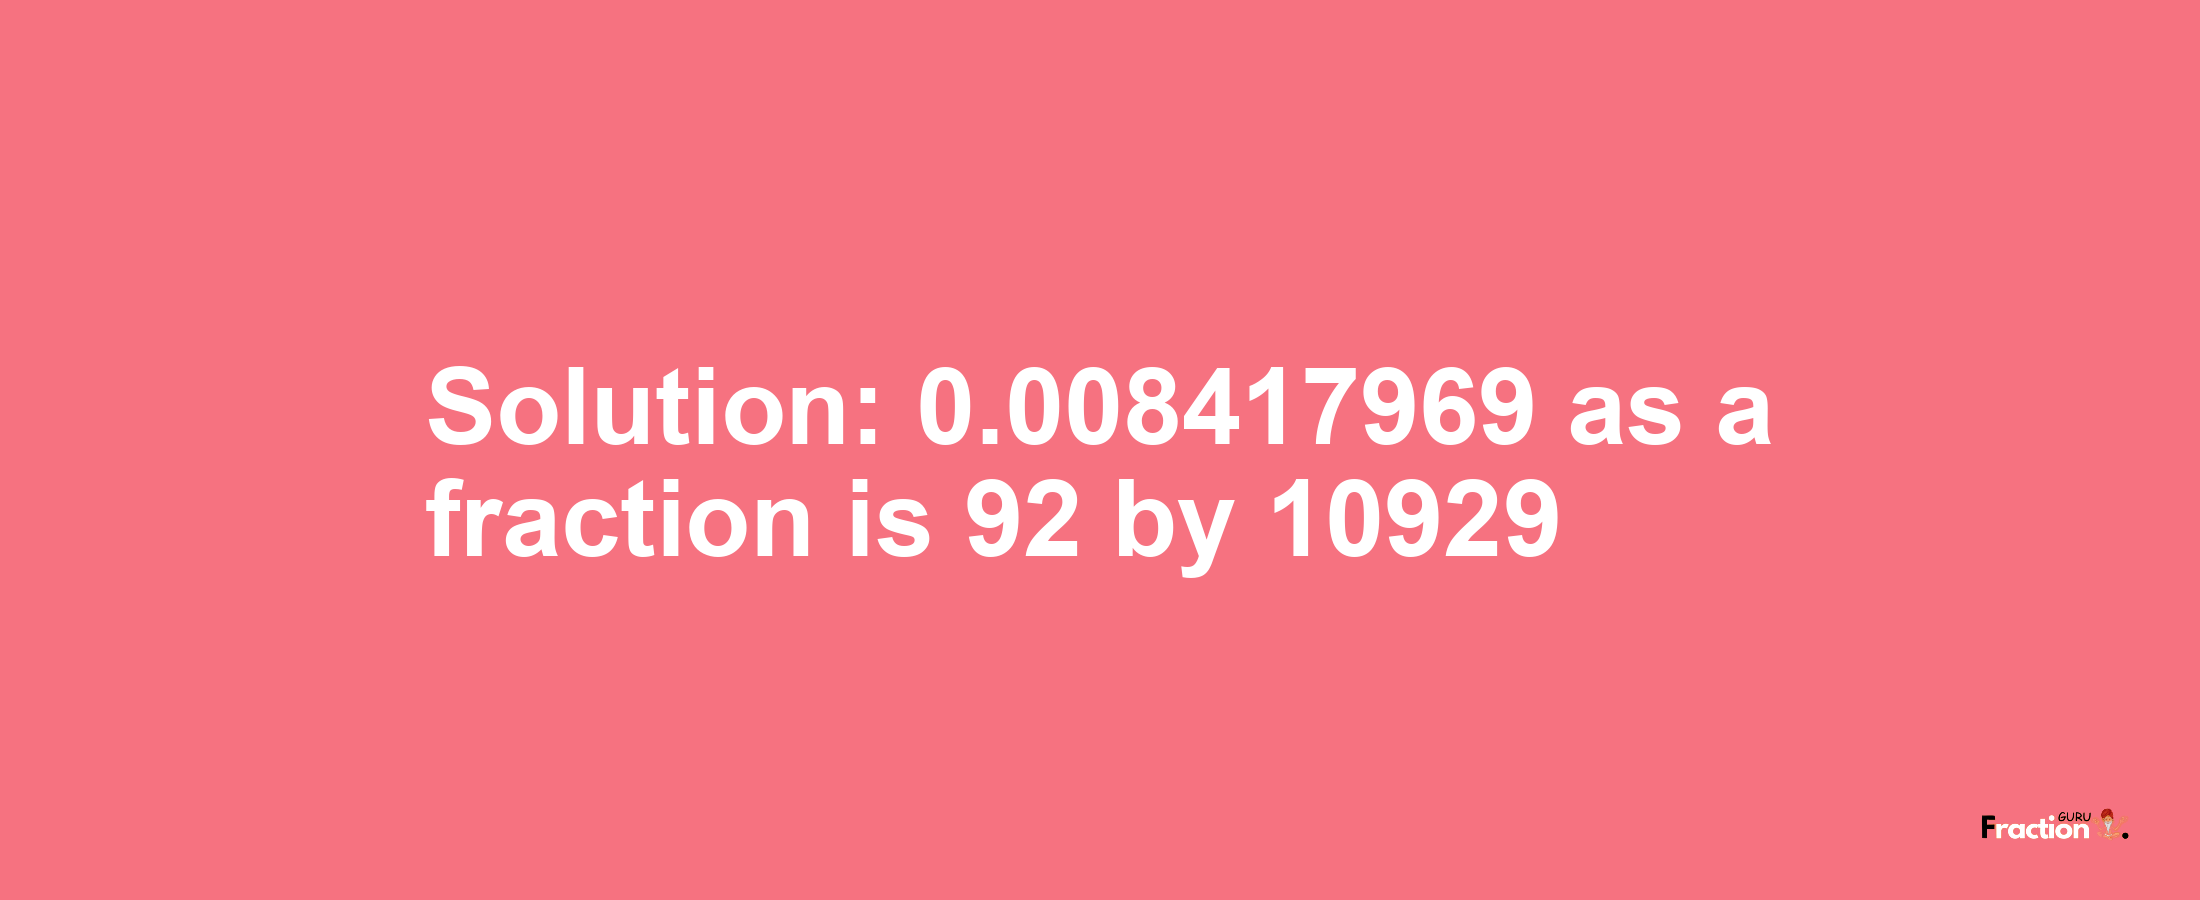 Solution:0.008417969 as a fraction is 92/10929